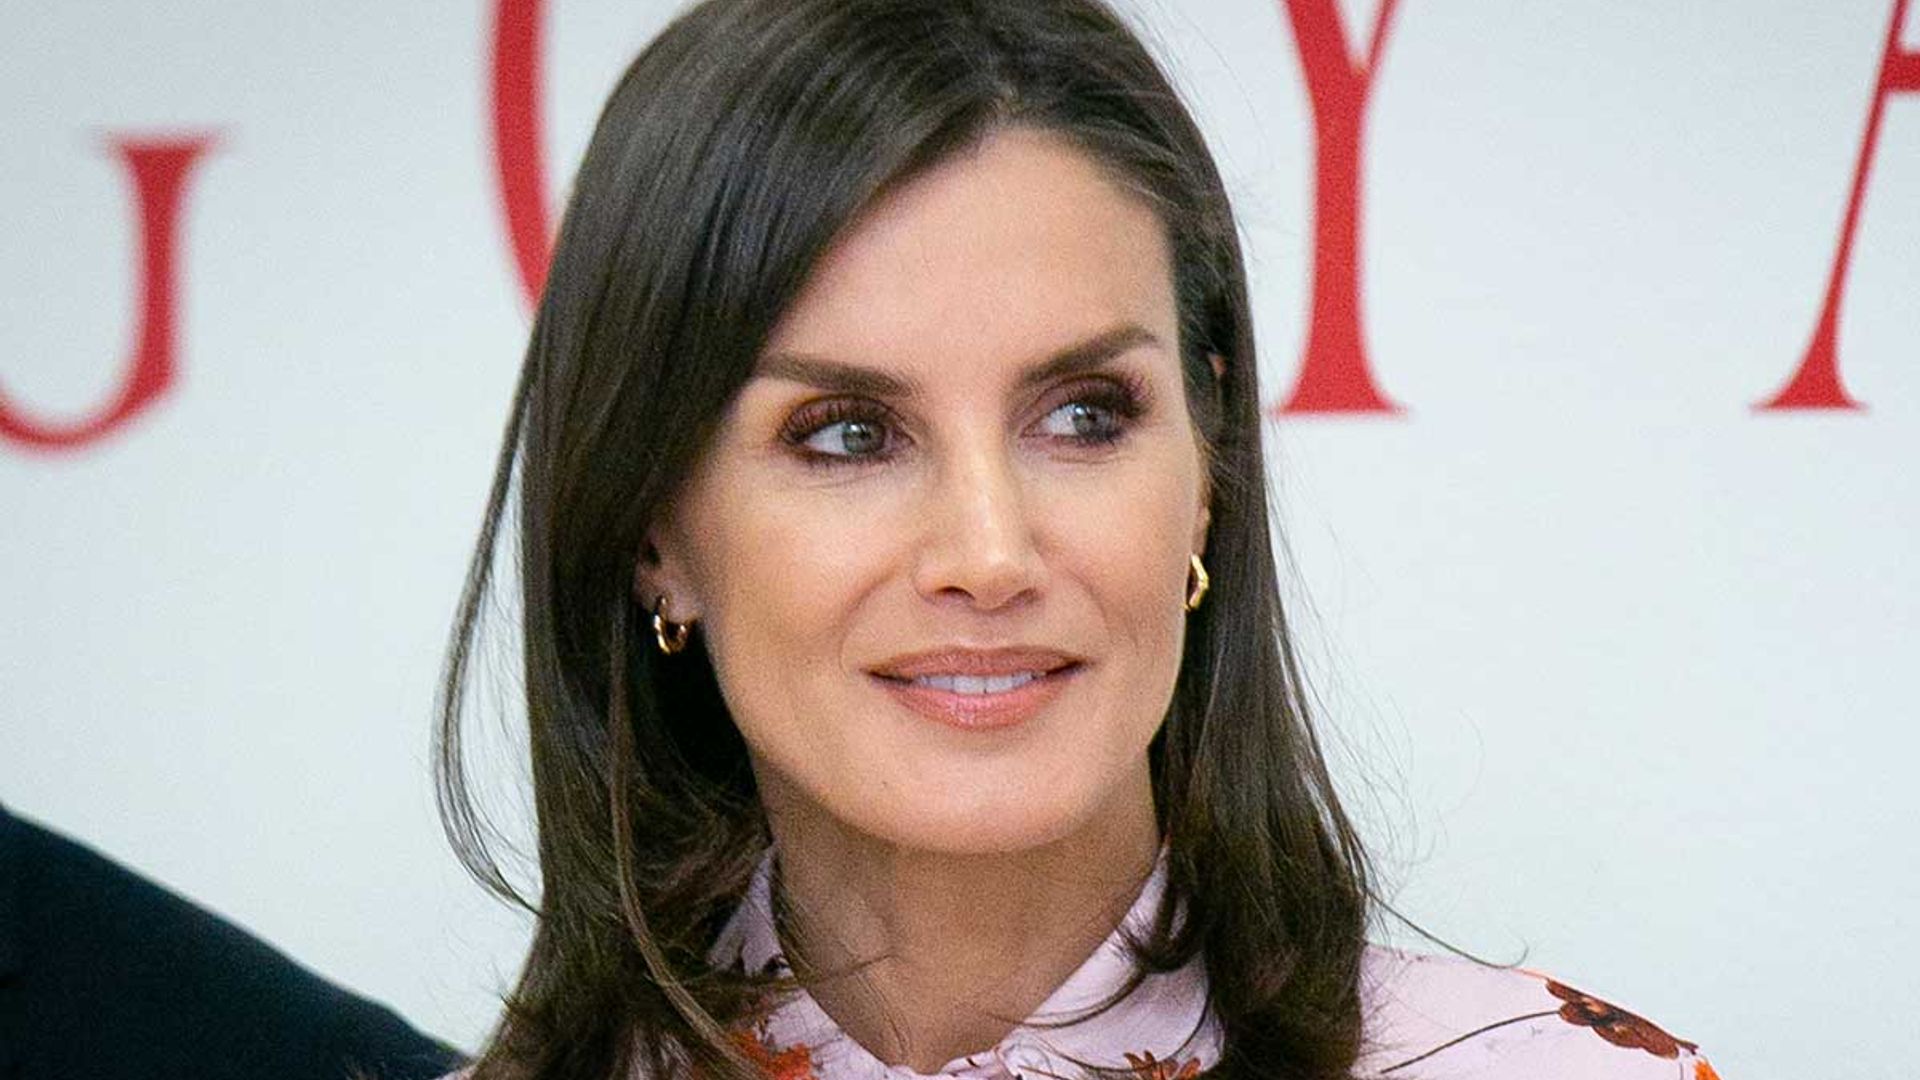 Queen Letizia just wore a millennial pink suit and it's gorgeous | HELLO!